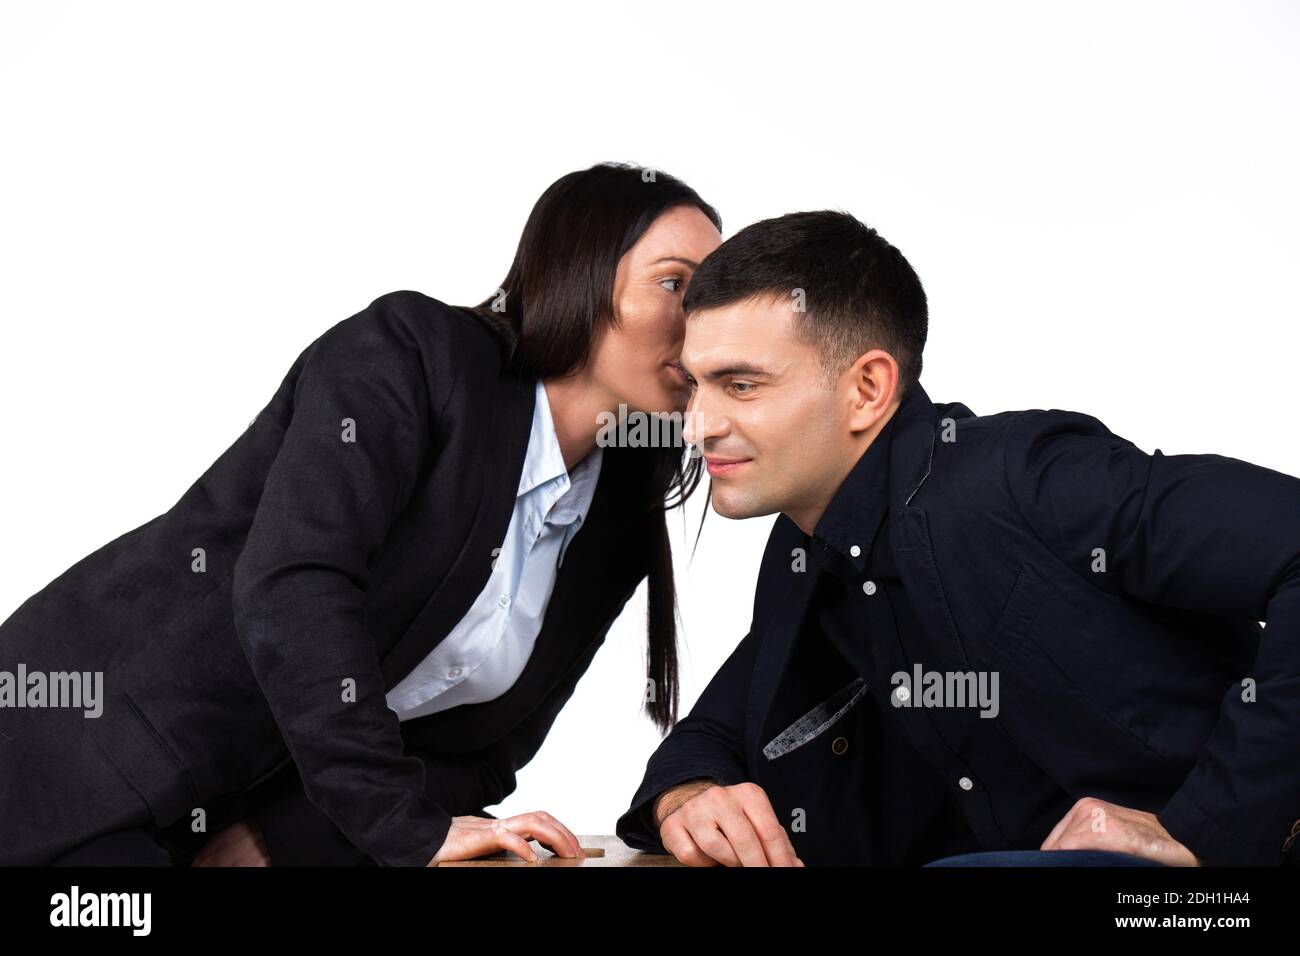 Battle between business partners. Businesswoman whispers something in the ear of businessmen. White background. Stock Photo